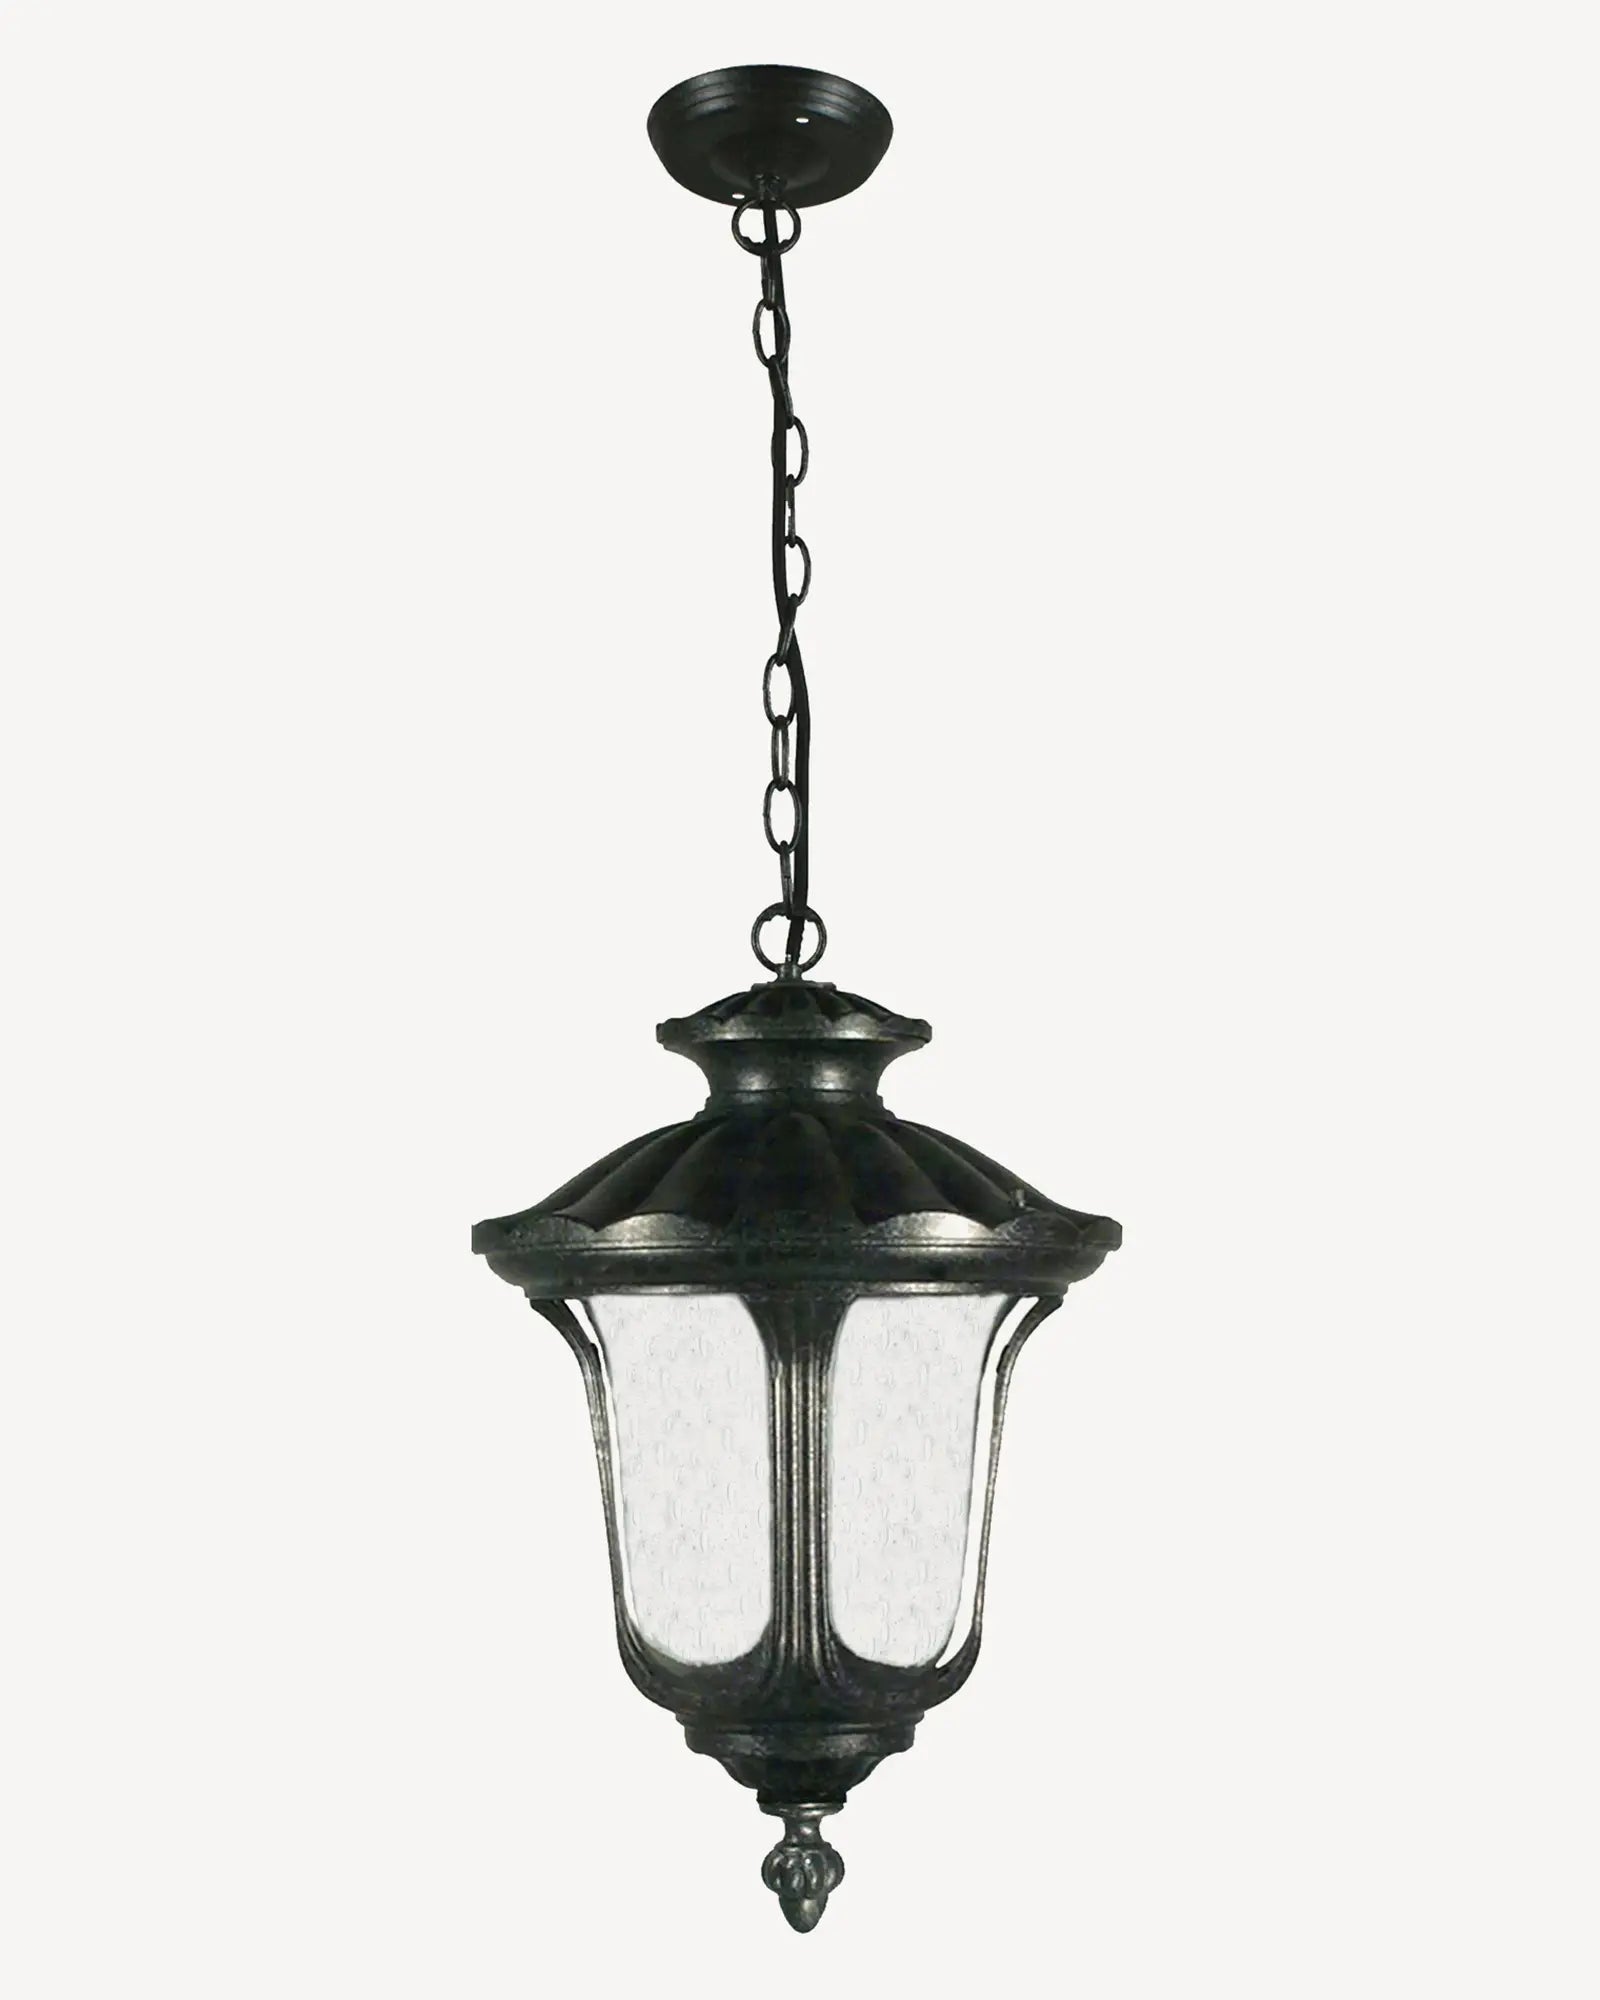 Waterford chain pendant light by Inspiration Light at Nook Collections